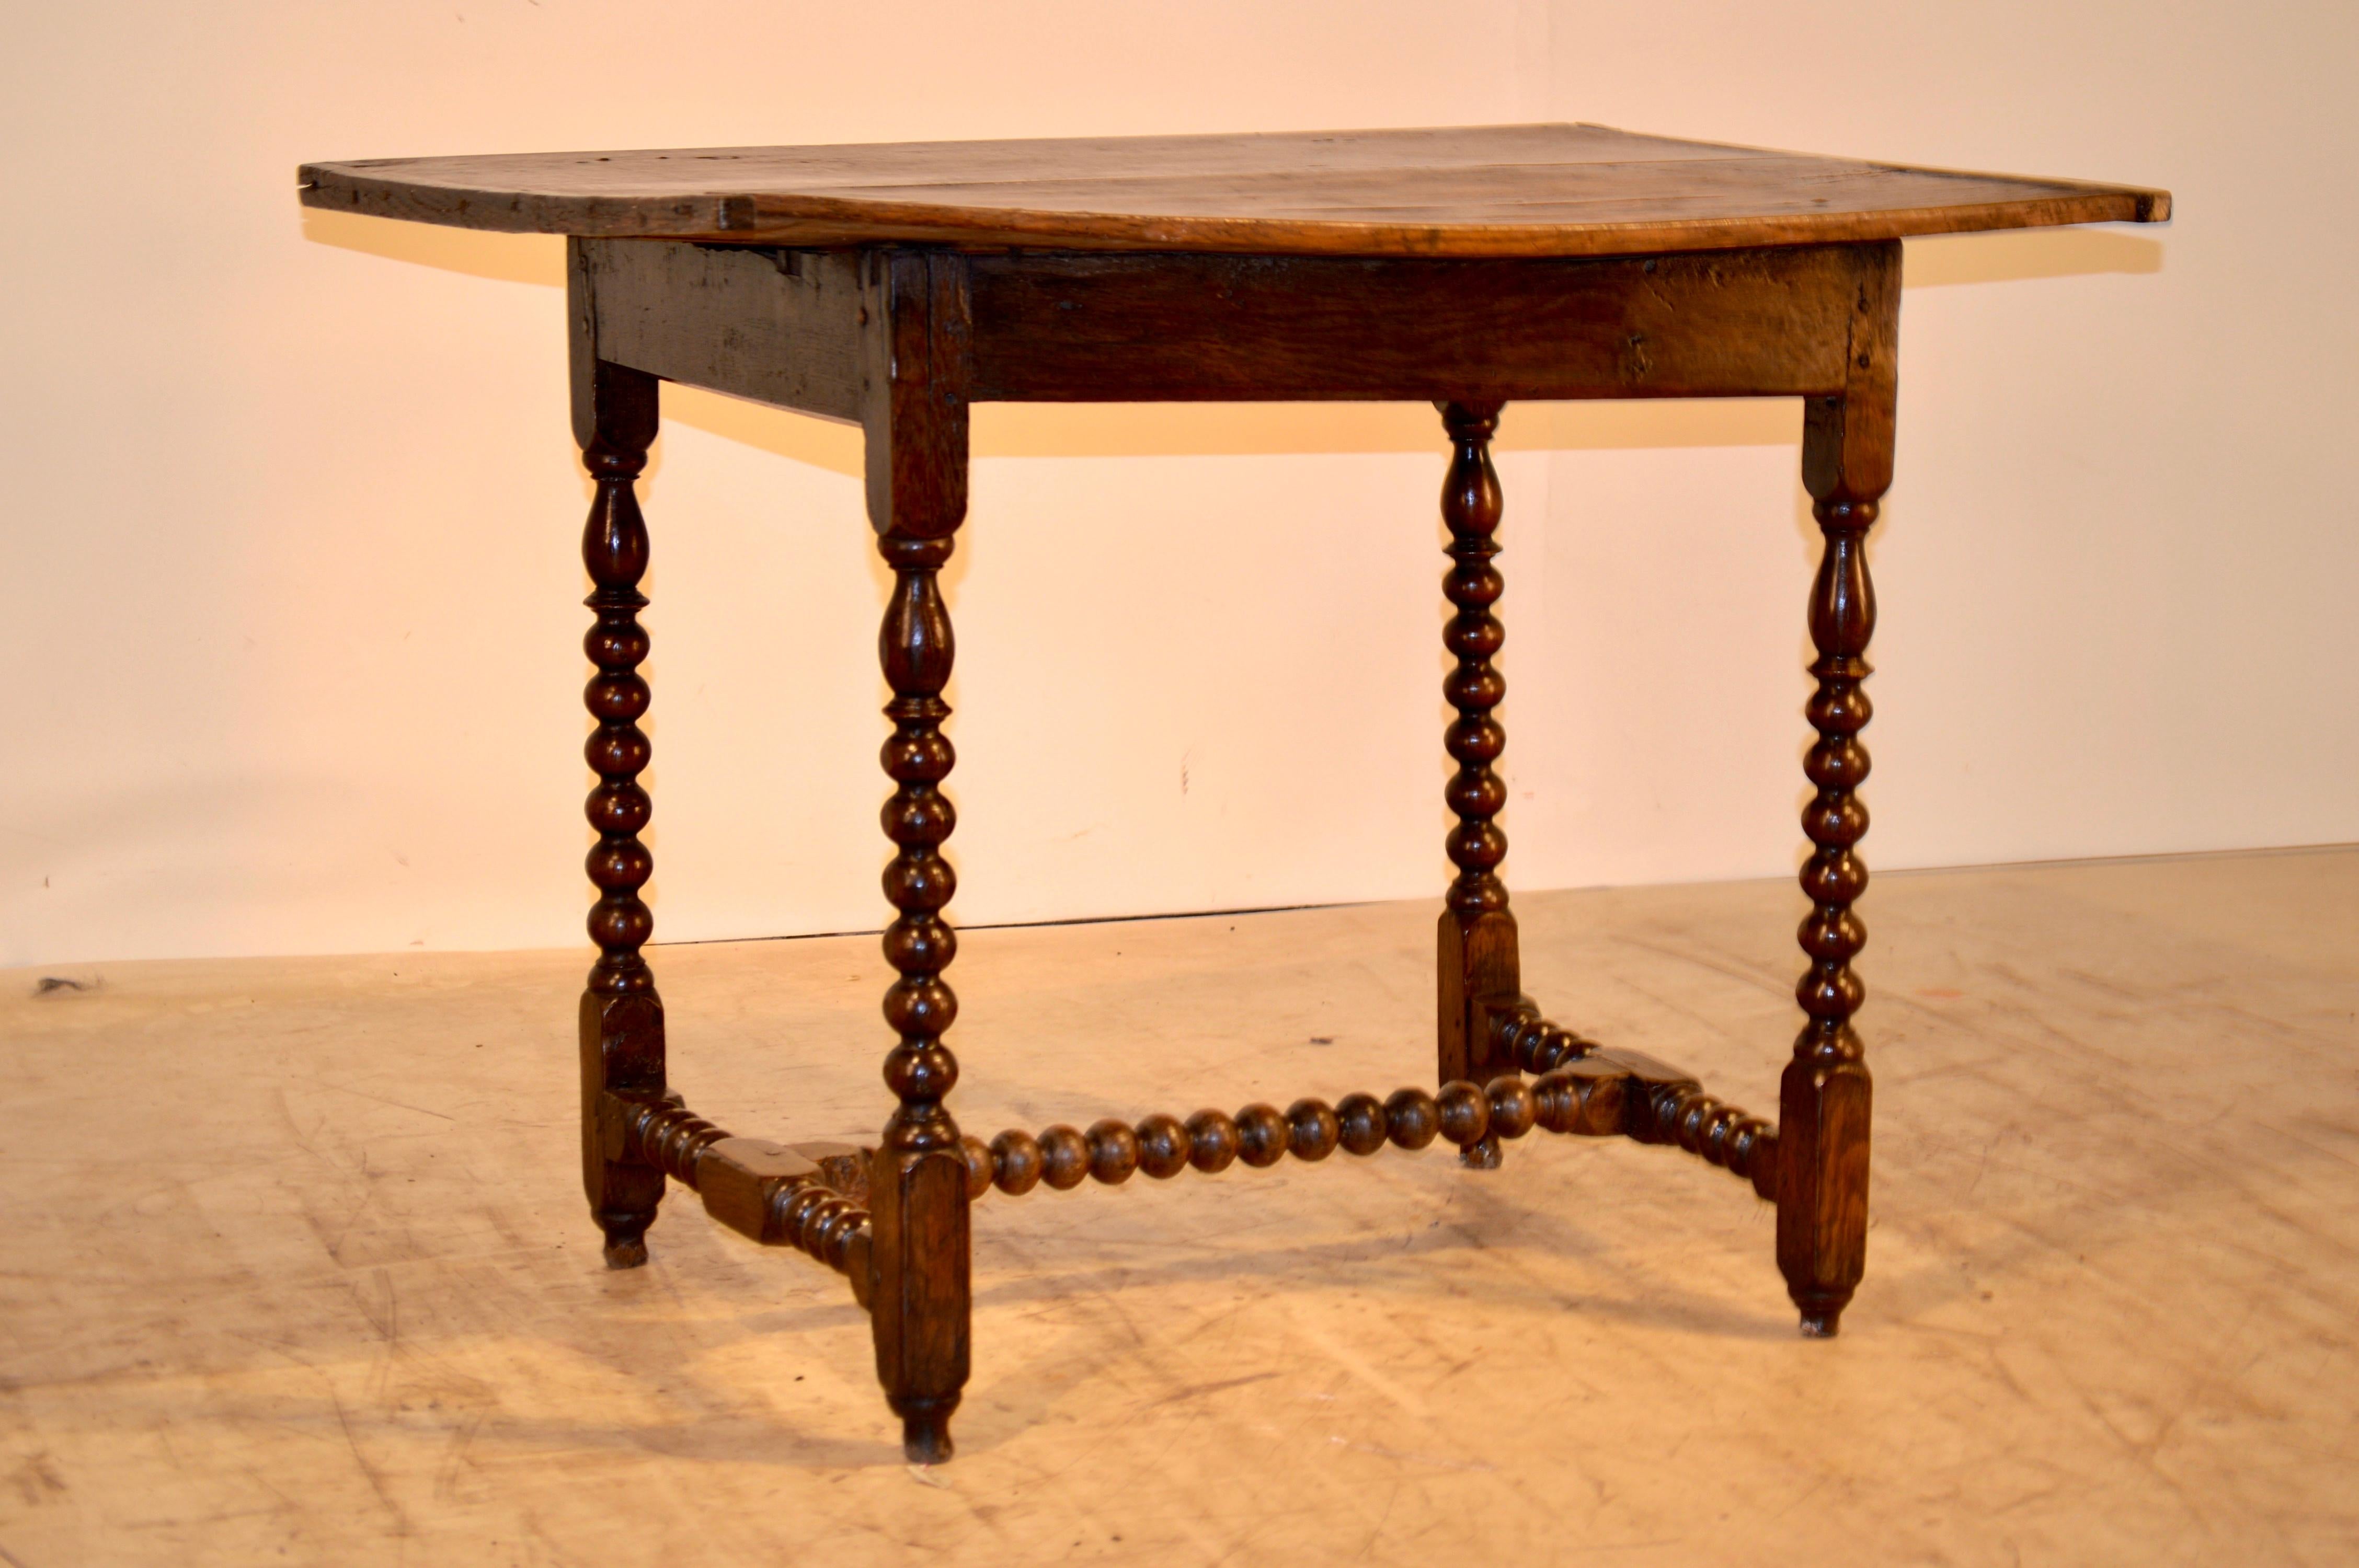 17th century English William and Mary oak side table with fabulous wear. The top is made up of two banded planks over a simple apron which is very Primitive. Supported on wonderfully hand-turned legs and stretcher. Losses to feet. Some wear,